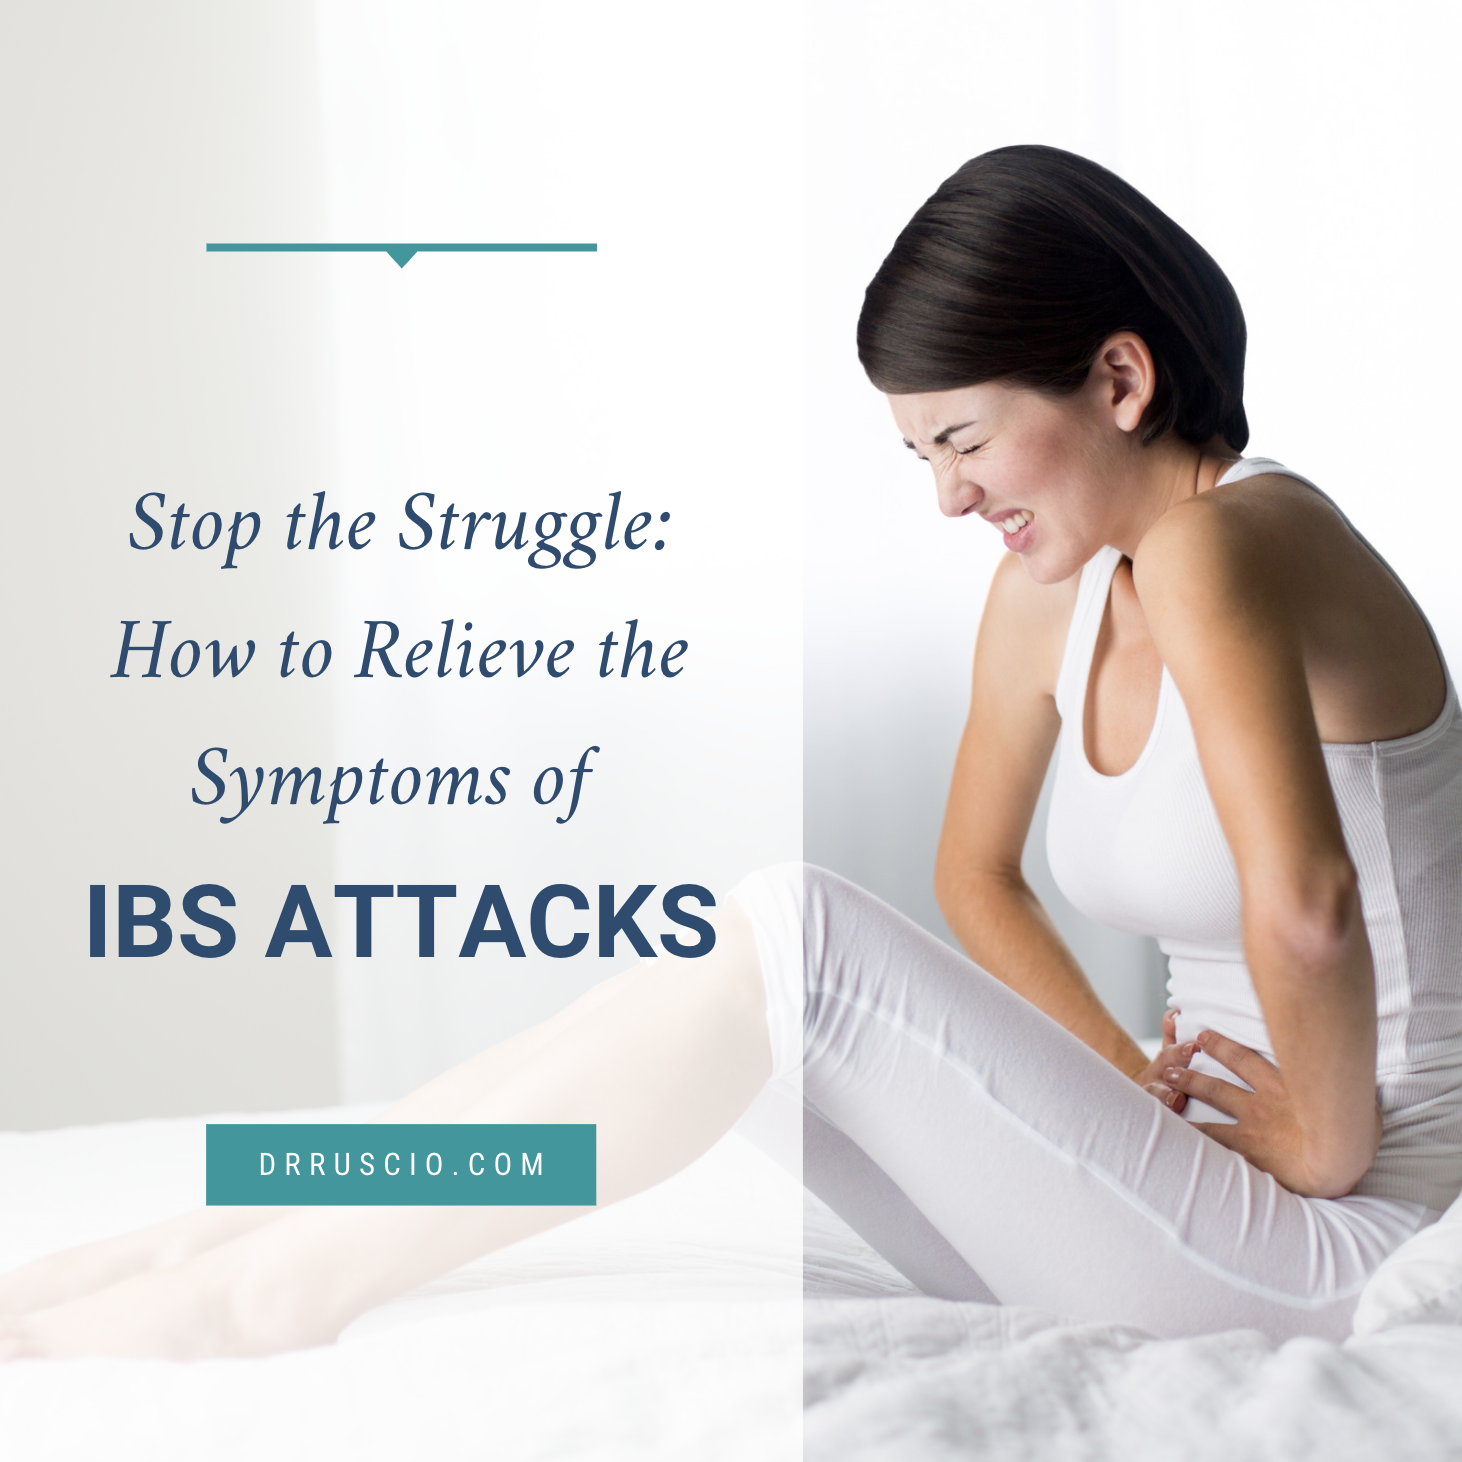 Stop the Struggle: How to Relieve the Symptoms of IBS Attacks